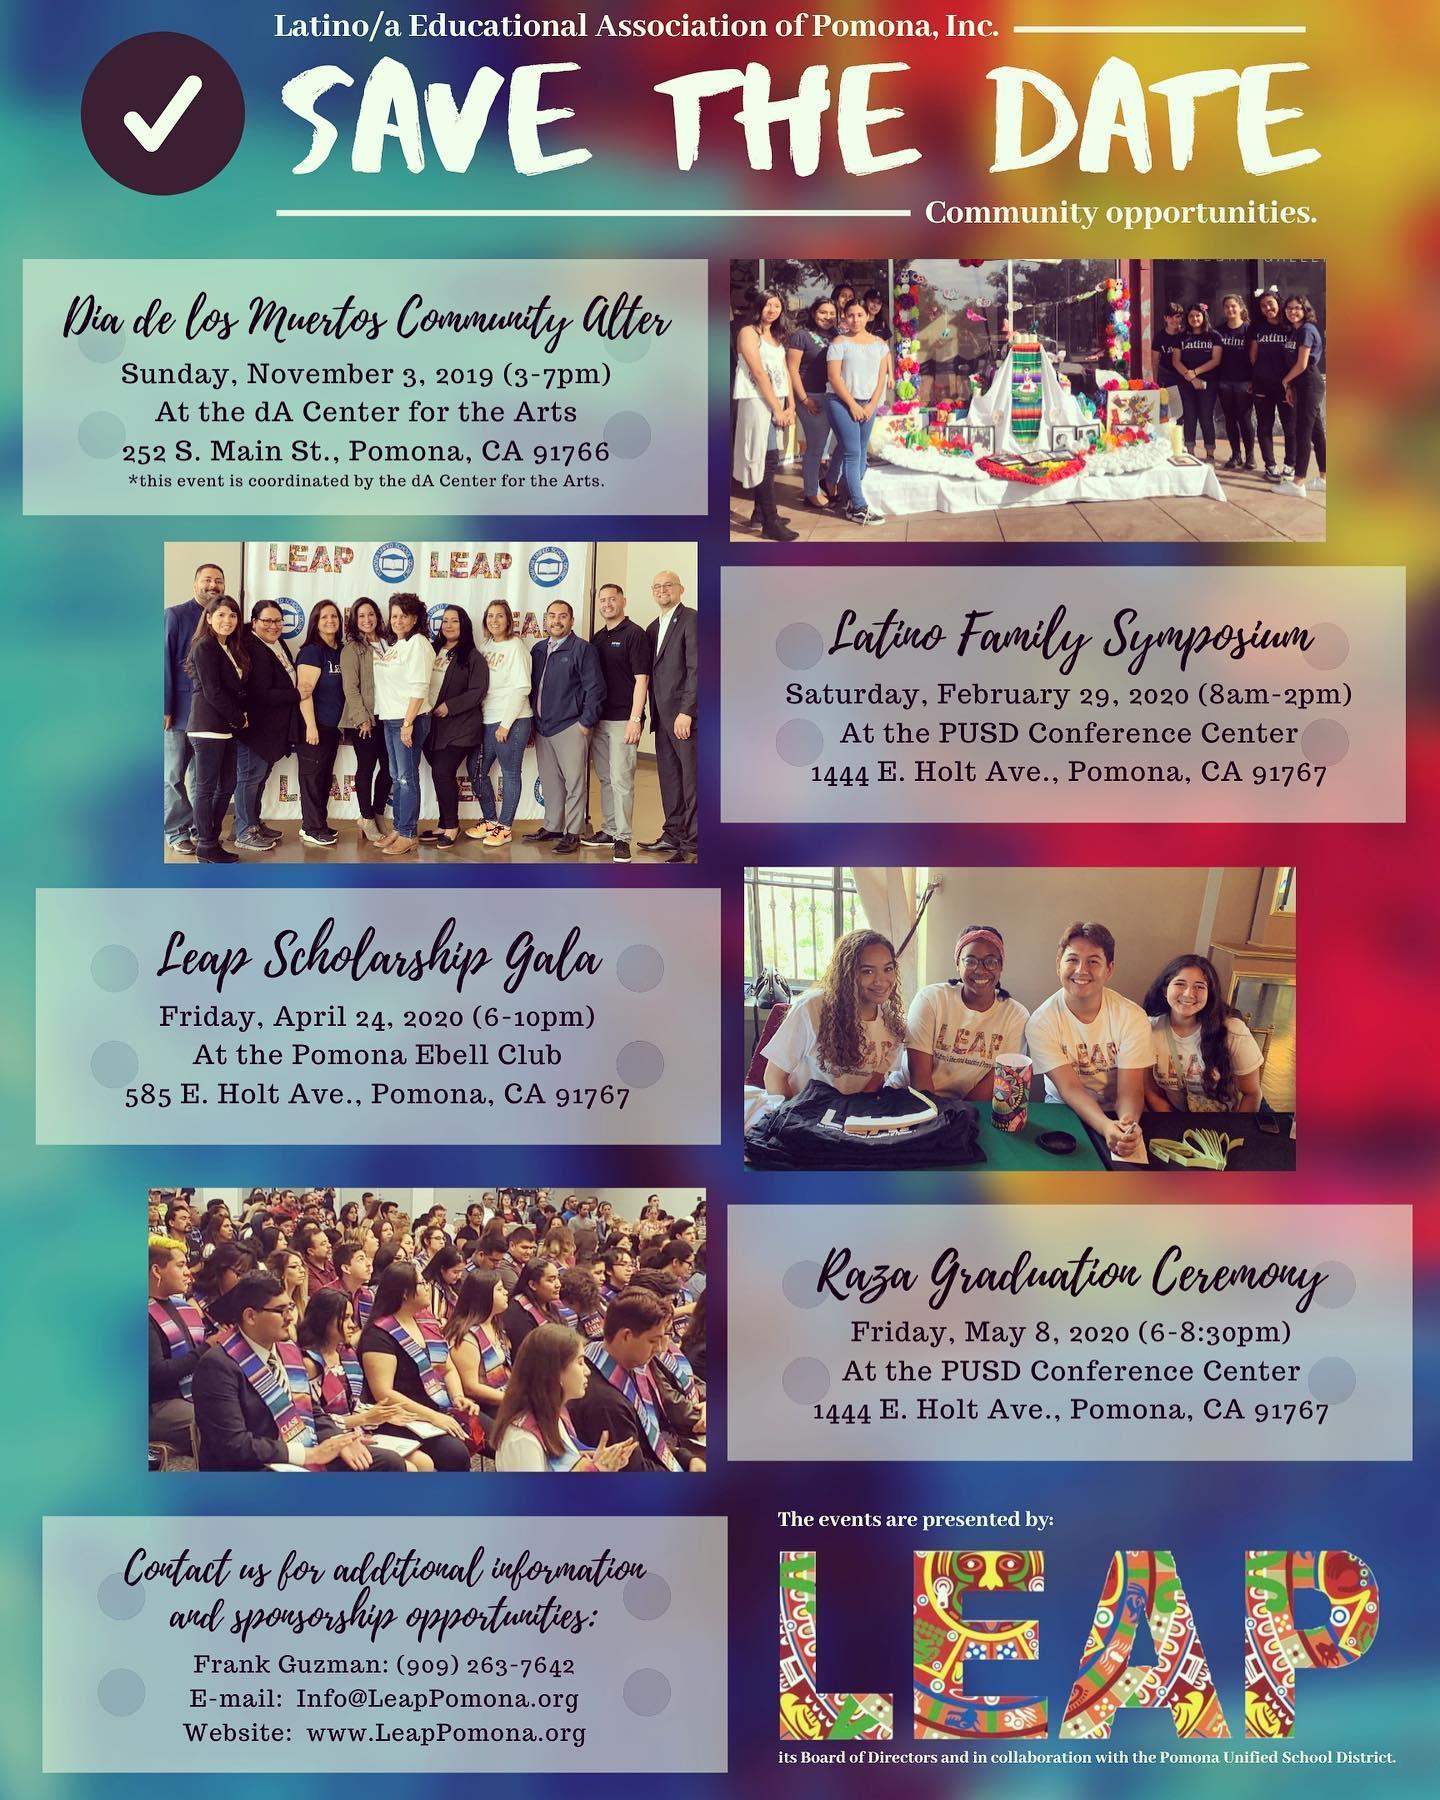 #savethedate for #LEAP upcoming #events! We have much in store for the community. @cityofpomona @pomonaunified join us for these special events! #SponsorshipOpportunitiesAvailable